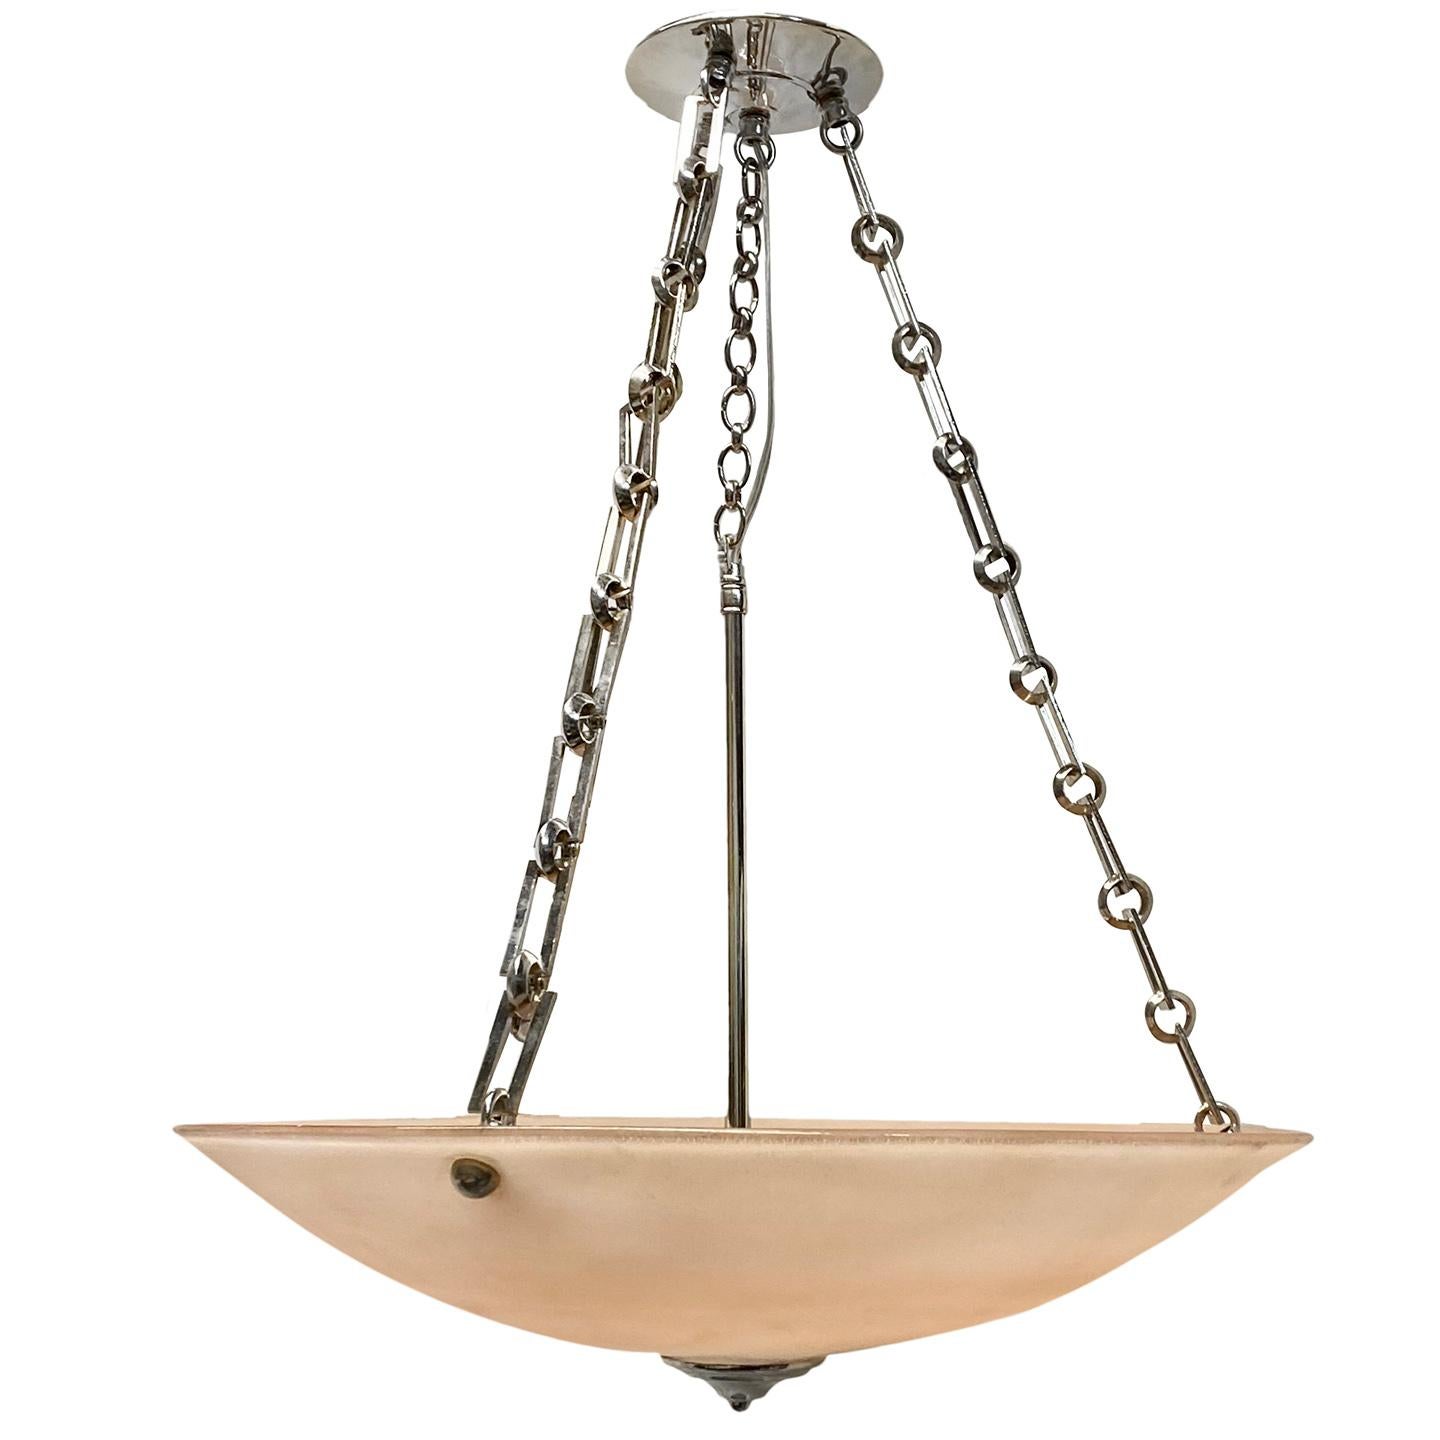 A circa 1920's French peach-coloured light fixture with nickel-plated chains.

Measurements:
Drop: 24